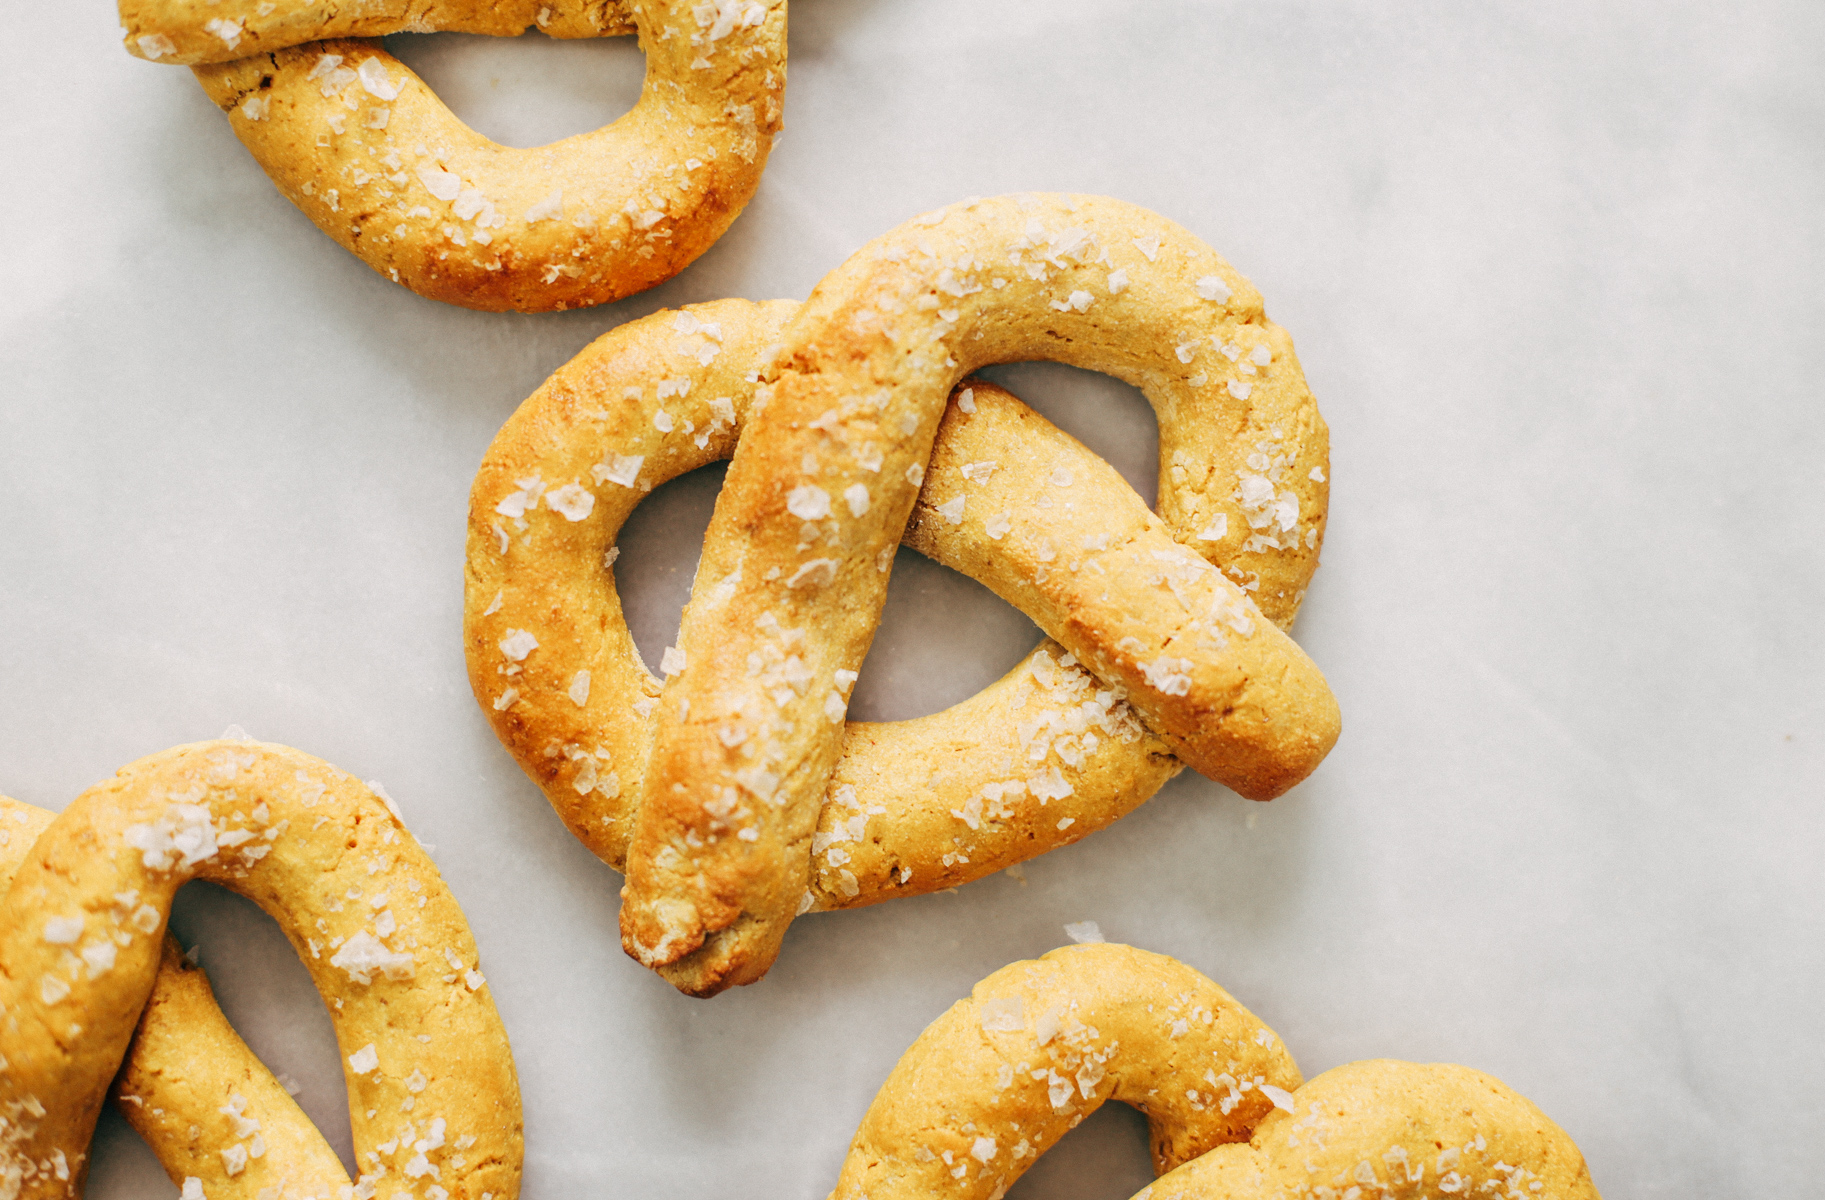 Paleo pretzels made with sweet potato! These gluten-free pretzels are easy to make and they are soft and chewy, like a real soft-baked pretzel. Can't stop eating them!